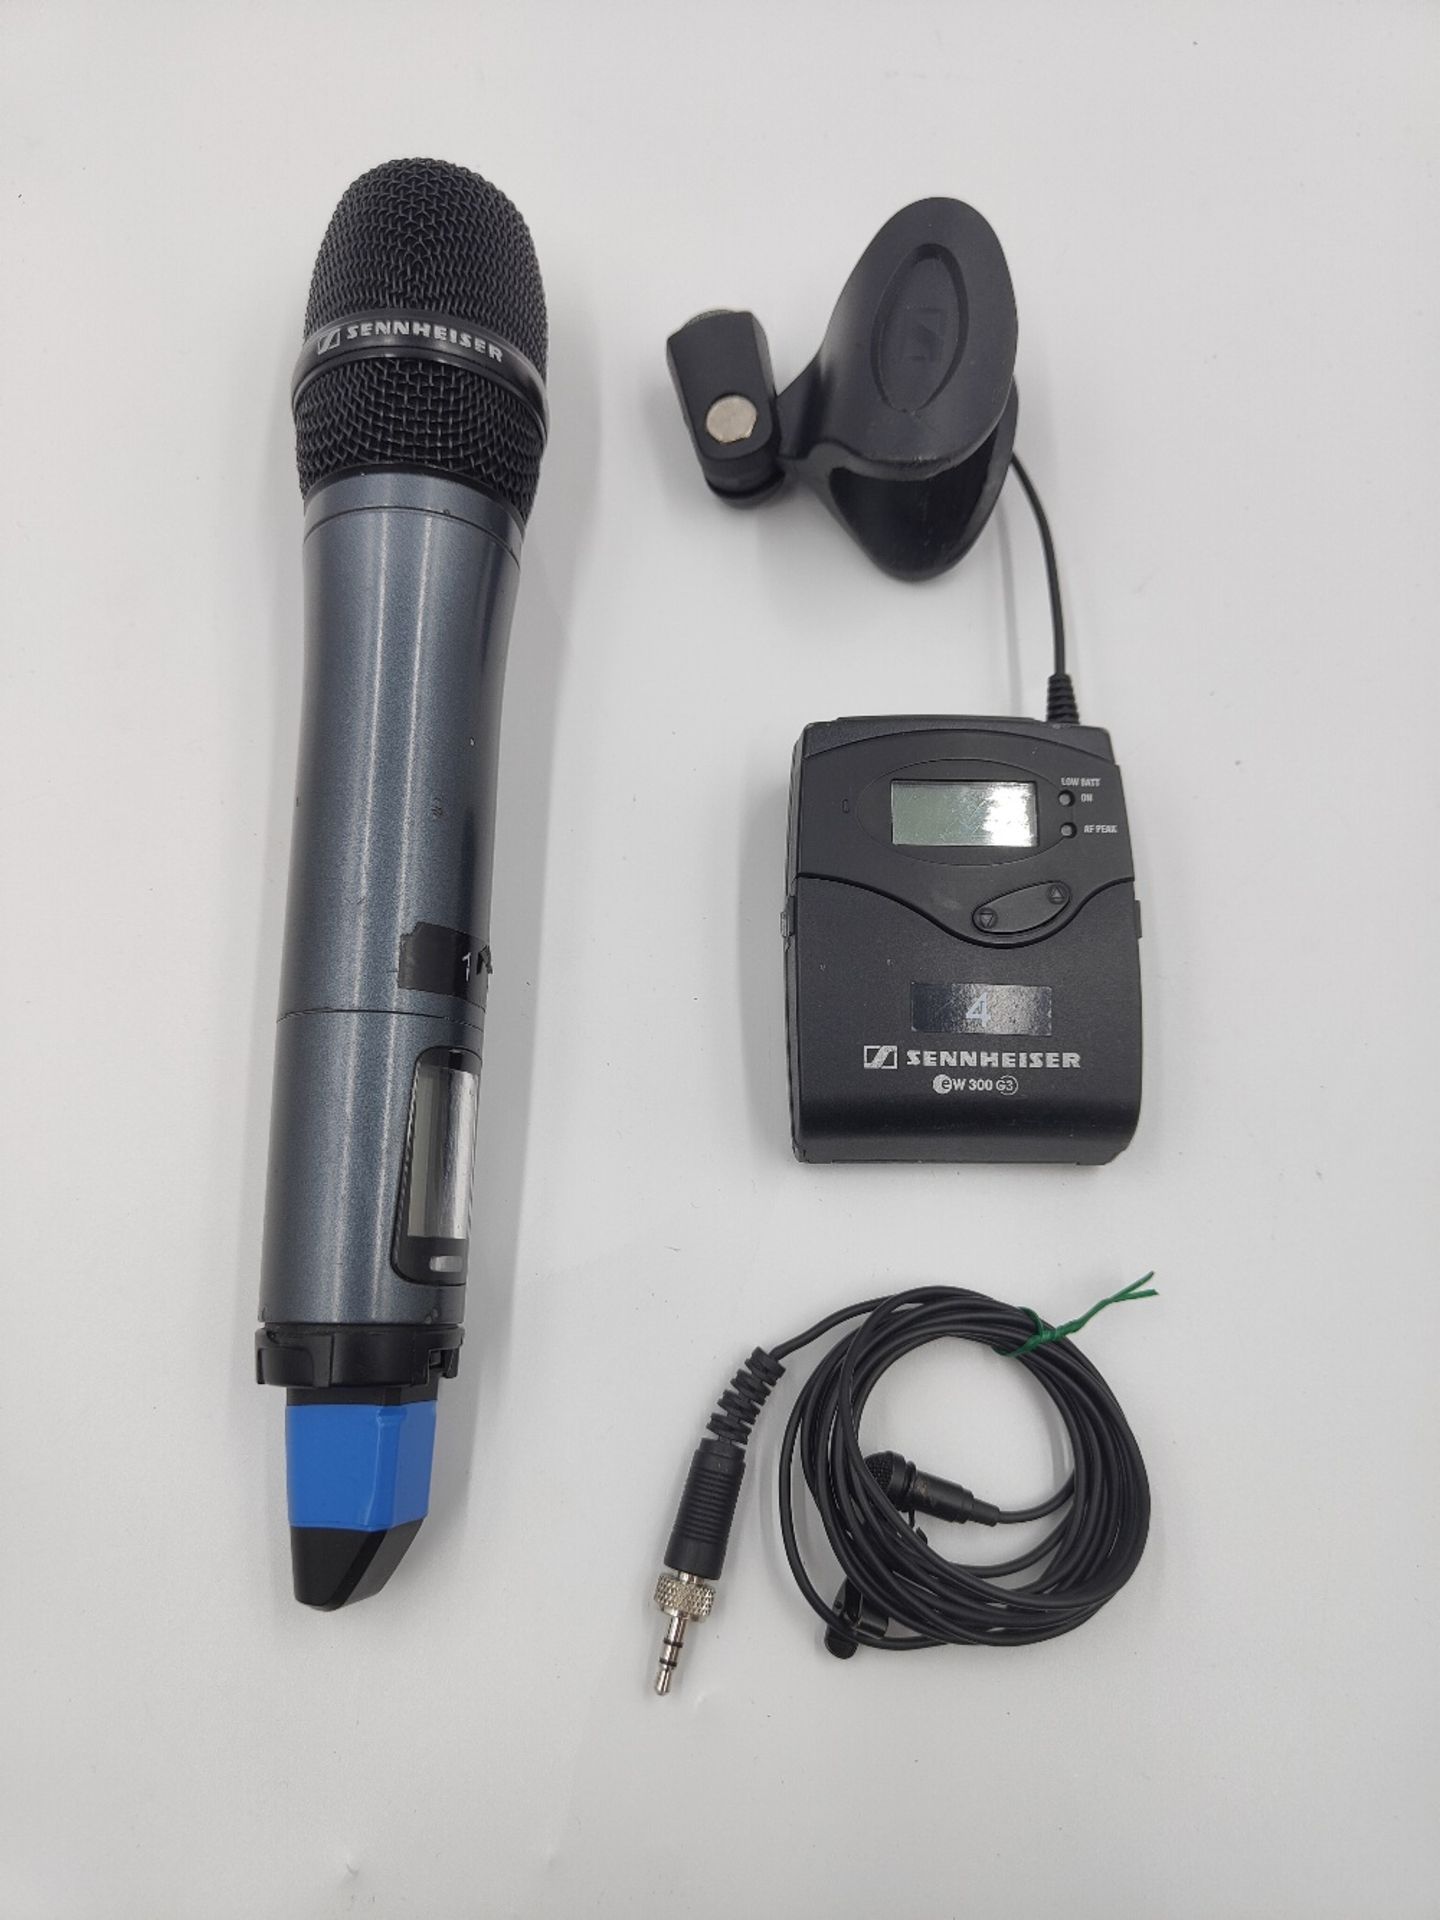 Sennheiser EW300/100 G3 Microphone and Receiver Kit - Image 2 of 5